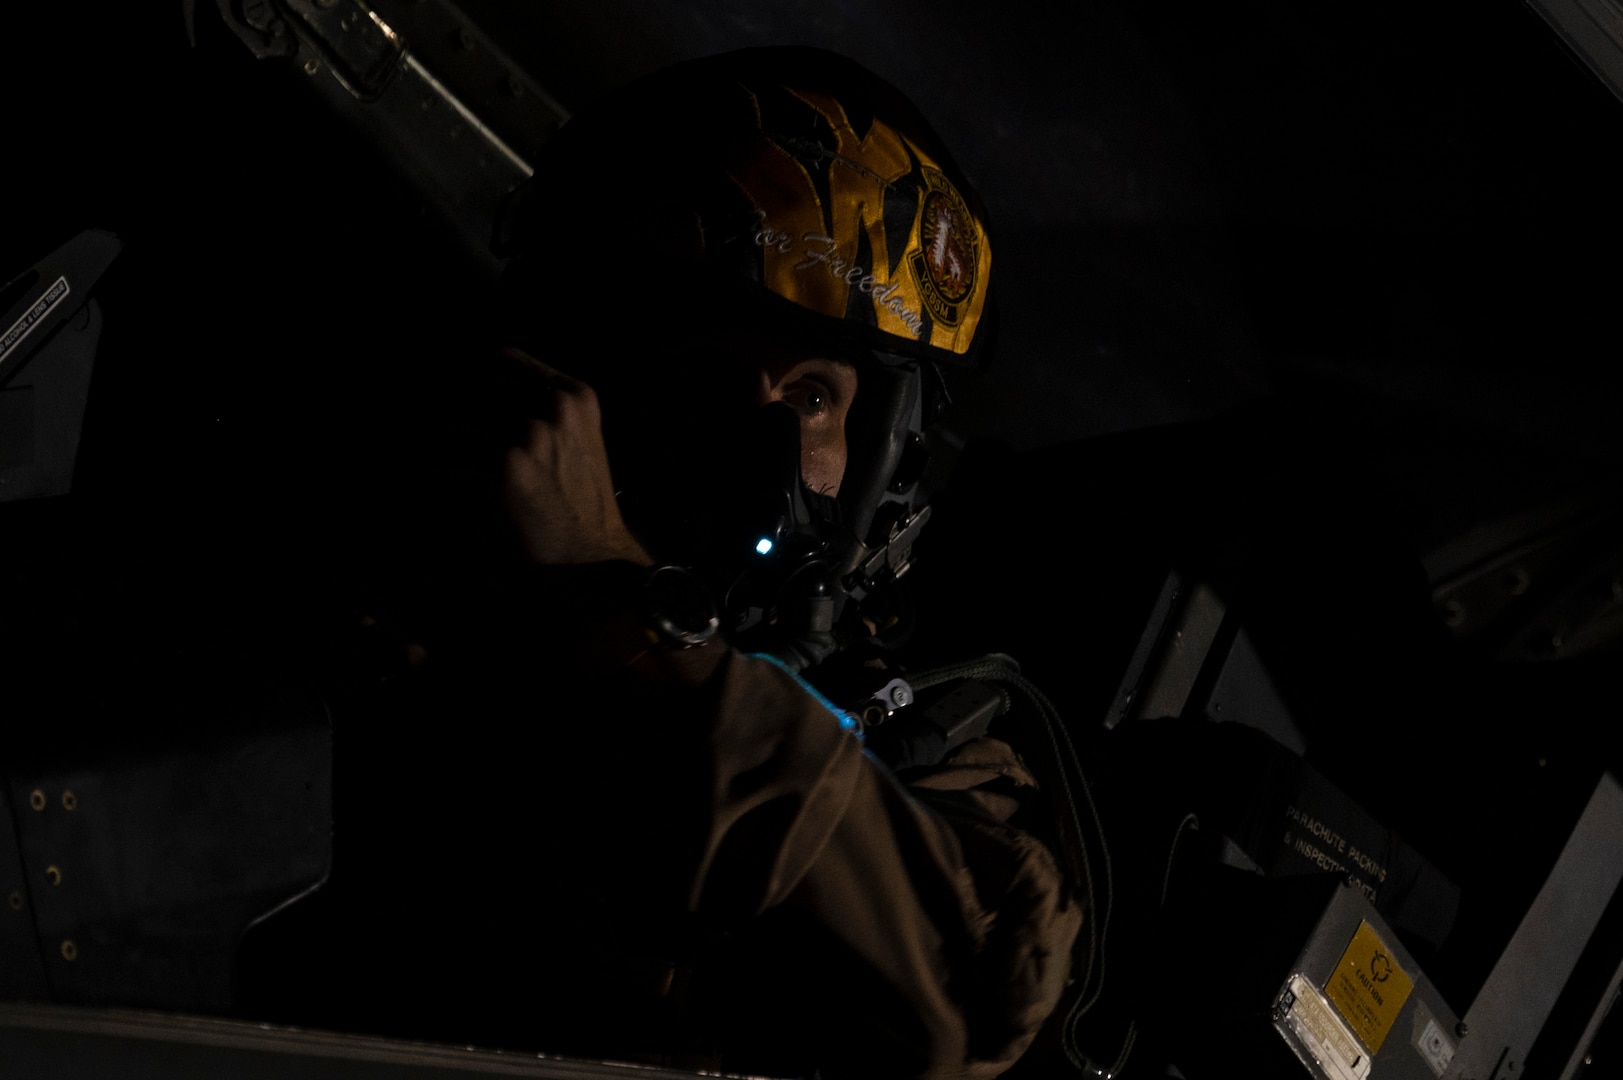 U.S. Air Force Lt. Col. Daniel Trueblood, 79th Expeditionary Fighter Squadron commander, prepares a F-16CM Fighting Falcon for departure during Operation Agile Spartan III at an undisclosed location, September 6, 2022. In order for pilots from the 79th EFS to depart and demonstrate vital Agile Combat Employment capabilities from a dispersed location, Airmen from Ali Al Salem Air Base, Kuwait and Prince Sultan Air Base, Kingdom of Saudi Arabia, rapidly deployed, testing its logistics and operational capabilities. These actions reflect the ACE paradigm, which is to proactively and reactively execute an operational scheme of maneuver within threat timelines in order to increase survivability while simultaneously generating combat power. (U.S. Air Force photo by Staff Sgt. Dalton Williams)